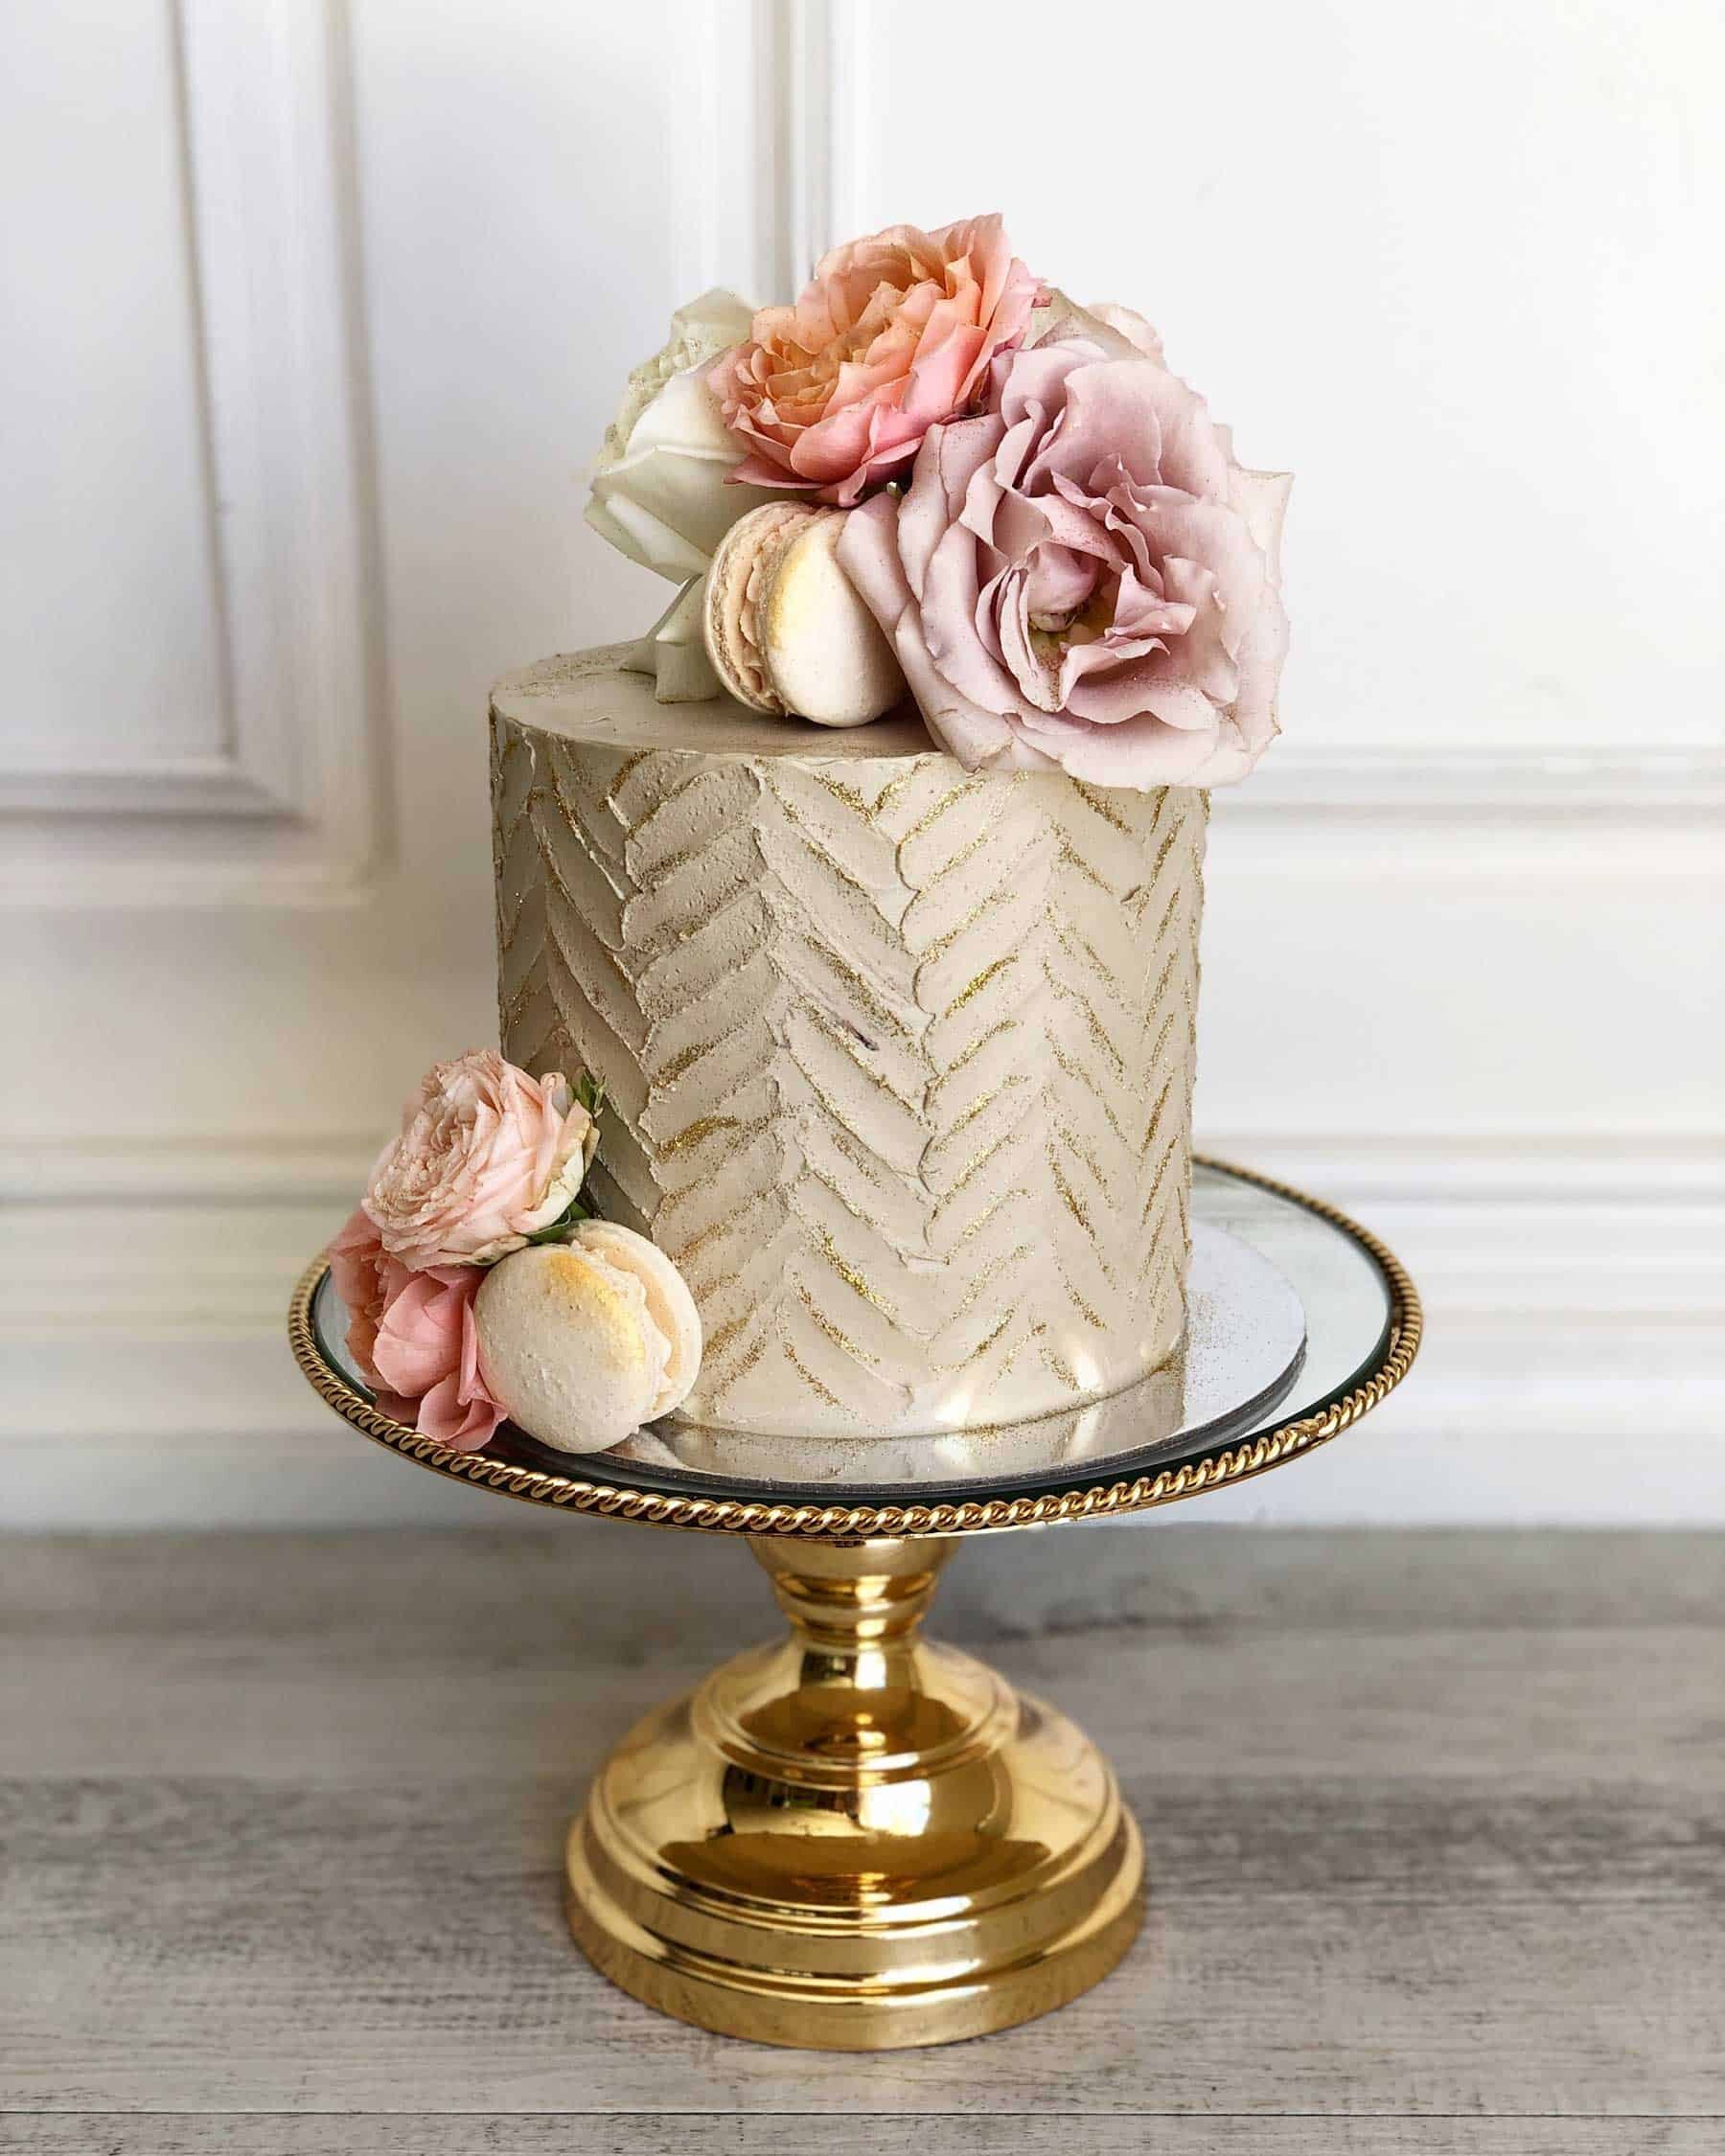 Katie Young's Cakes (@katieyoungscakes) • Instagram photos and videos